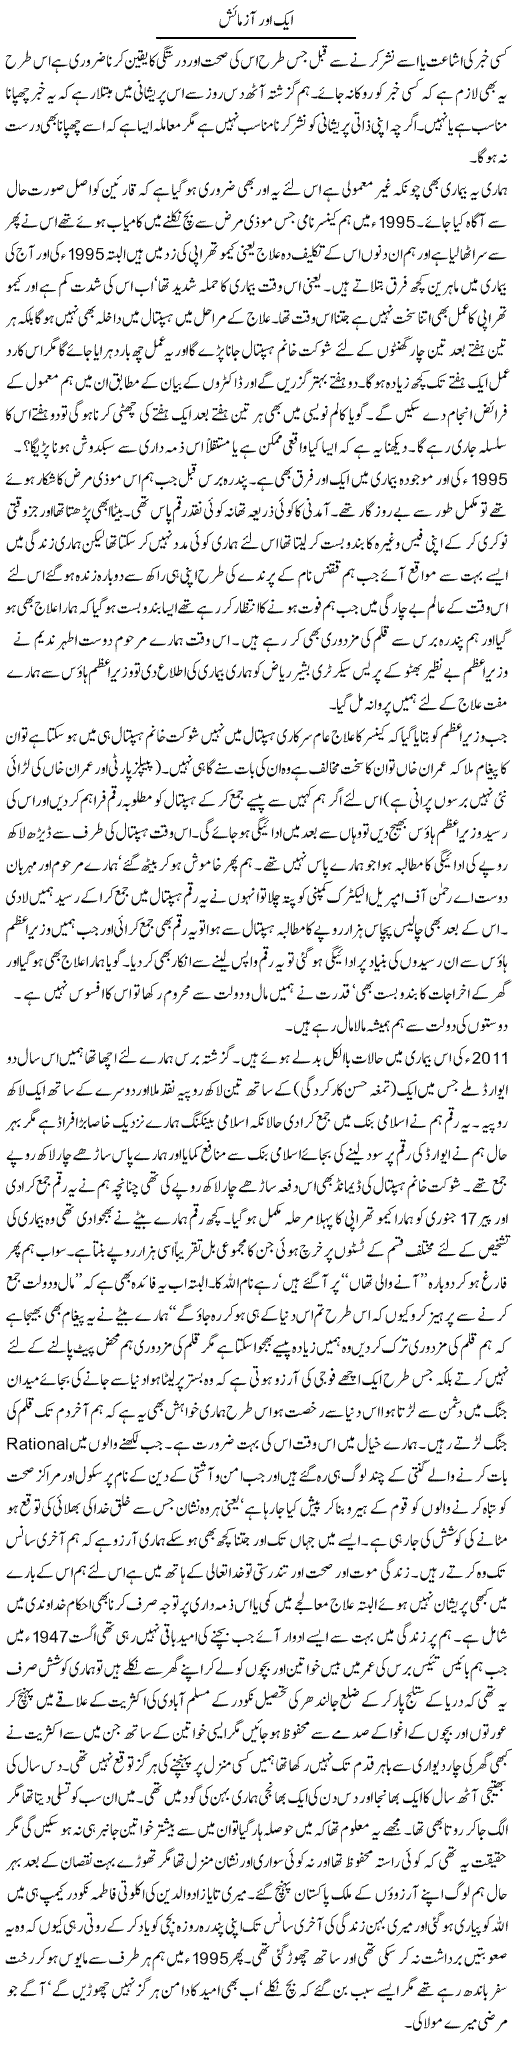 Another Difficulty Express Column Hameed Akhtar 24 January 2011